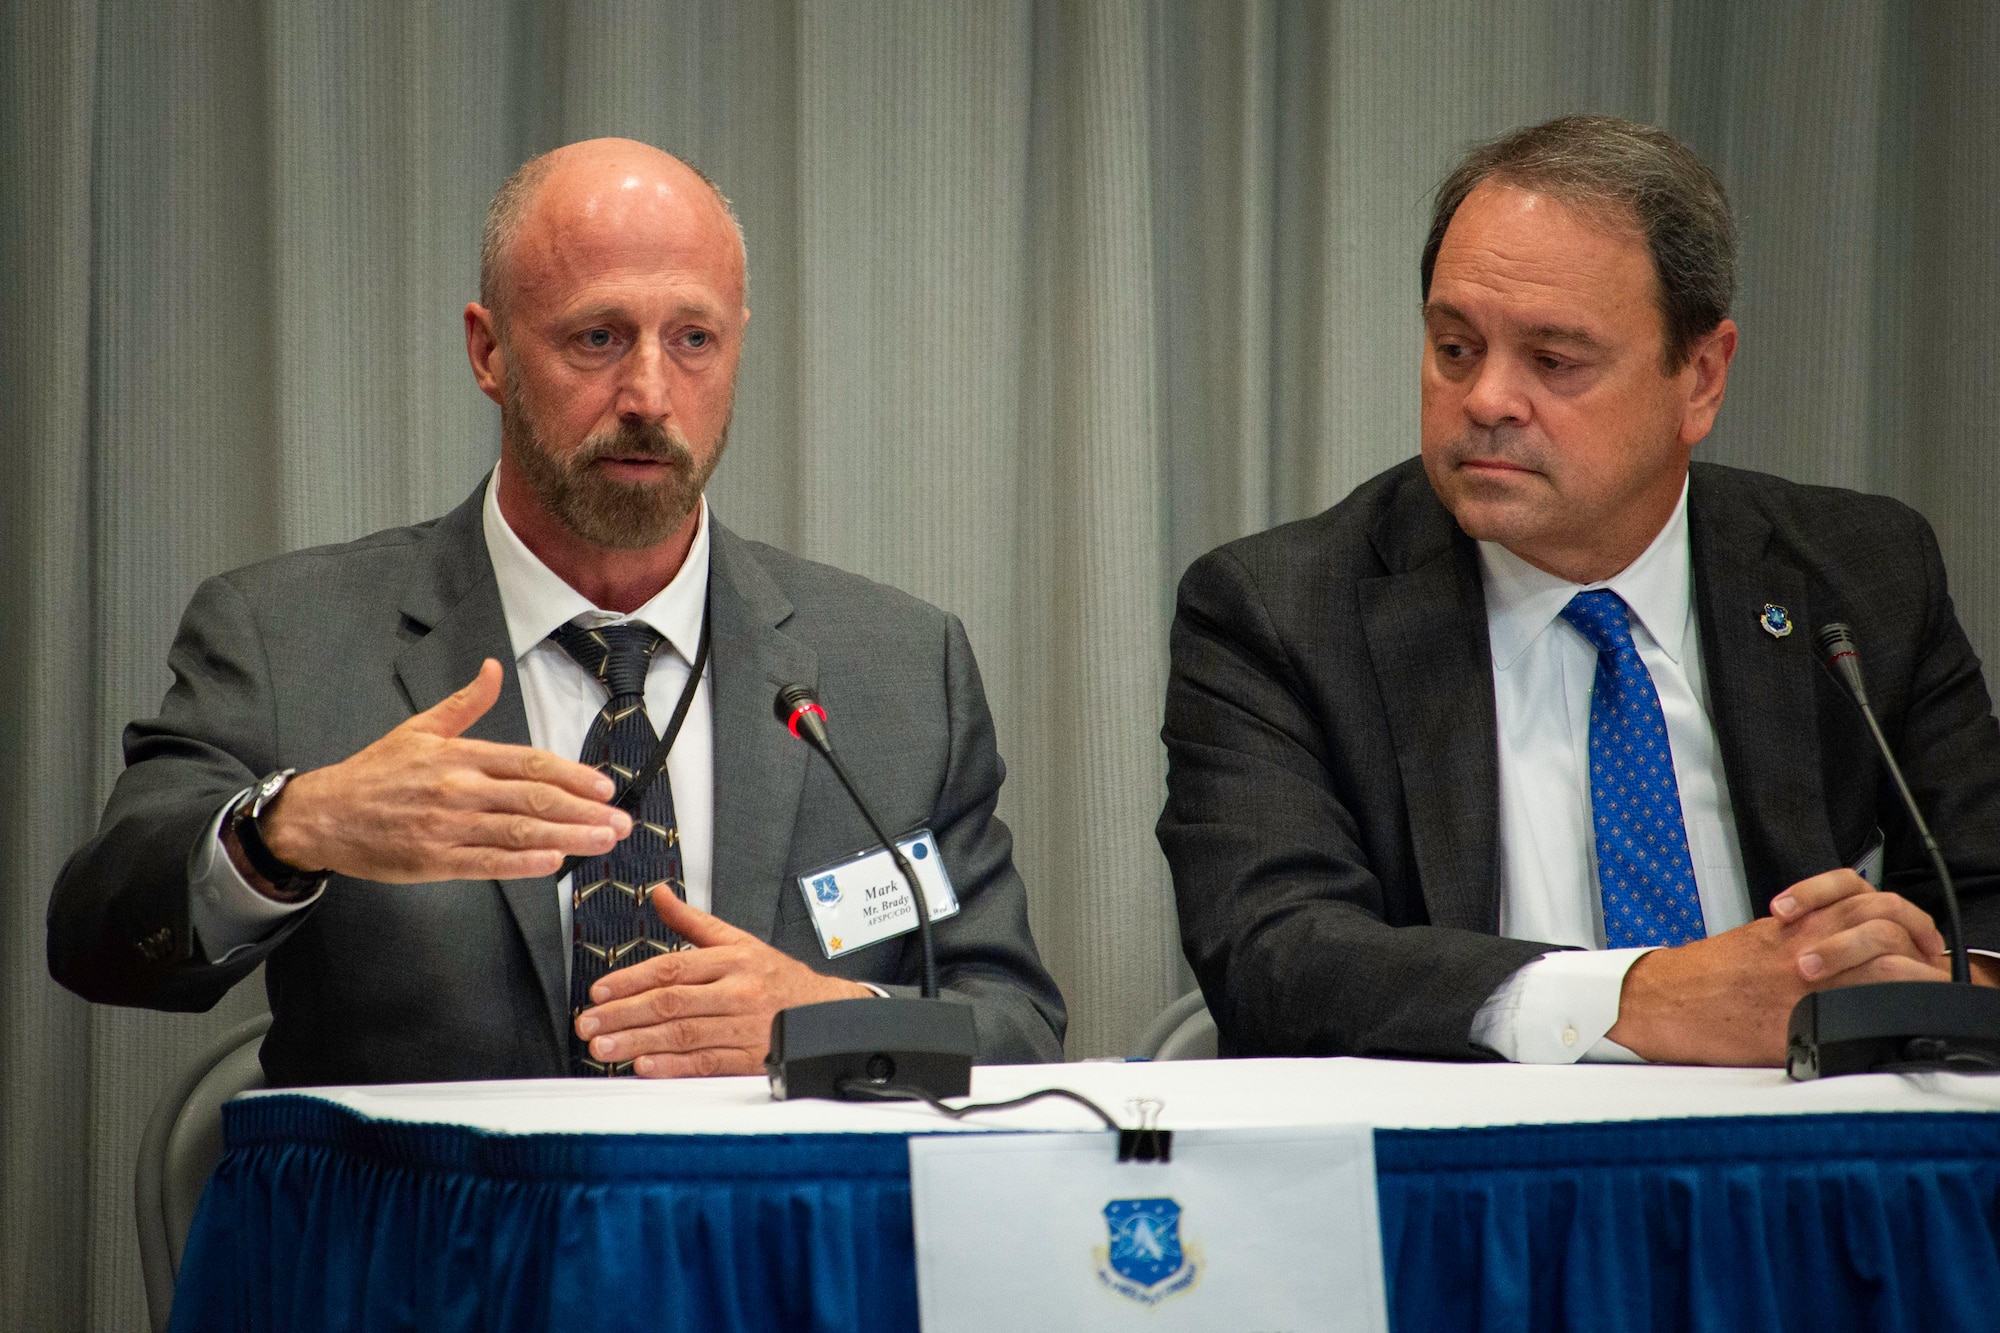 Dr. Mark Brady, Air Force Space Command chief data officer, participates in a panel discussion during the AFSPC Chief Data Office Innovation Summit at Headquarters AFSPC, July 30-31, 2019. Attendees included representatives from the State Department, NASA, U.S. Strategic Command, Pacific Air Forces and Air Combat Command, as well as the many organizations within AFSPC. (U.S. Air Force photo by Staff Sgt. Justin Armstrong)